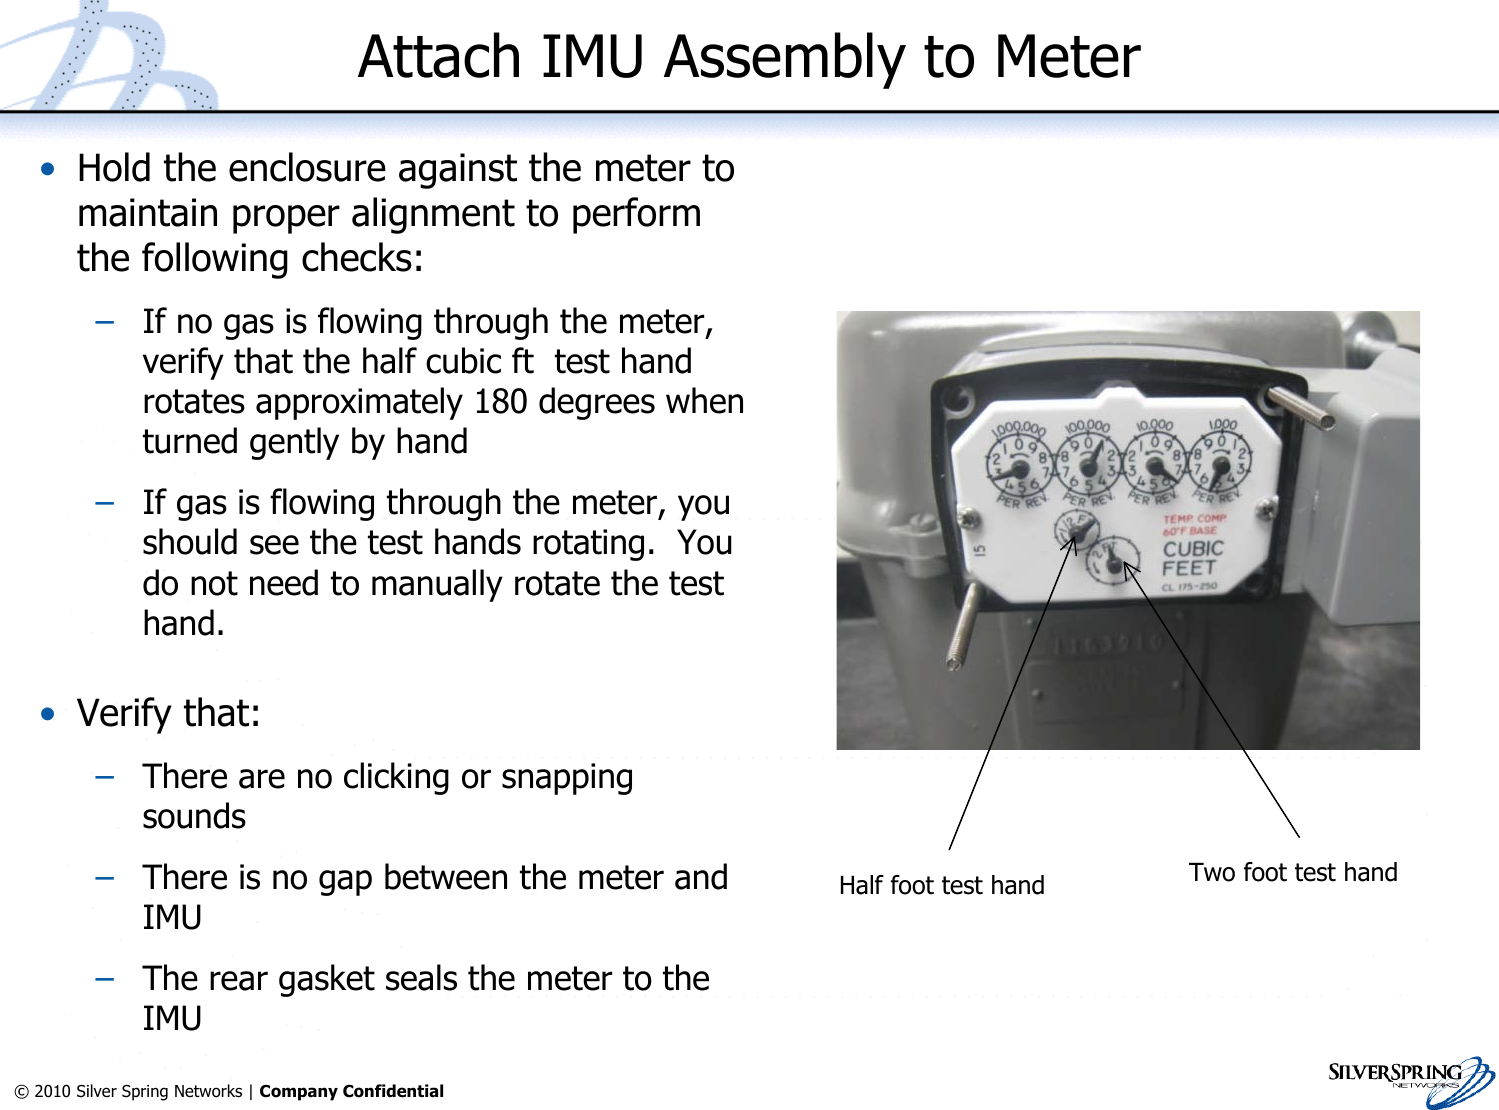 16© 2010 Silver Spring Networks | Company Confidential Attach IMU Assembly to Meter•Hold the enclosure against the meter tomaintain proper alignment to performthe following checks:–If no gas is flowing through the meter,verify that the half cubic ft  test handrotates approximately 180 degrees whenturned gently by hand–If gas is flowing through the meter, youshould see the test hands rotating.  Youdo not need to manually rotate the testhand.•Verify that:–There are no clicking or snappingsounds–There is no gap between the meter andIMU–The rear gasket seals the meter to theIMUHalf foot test hand Two foot test hand